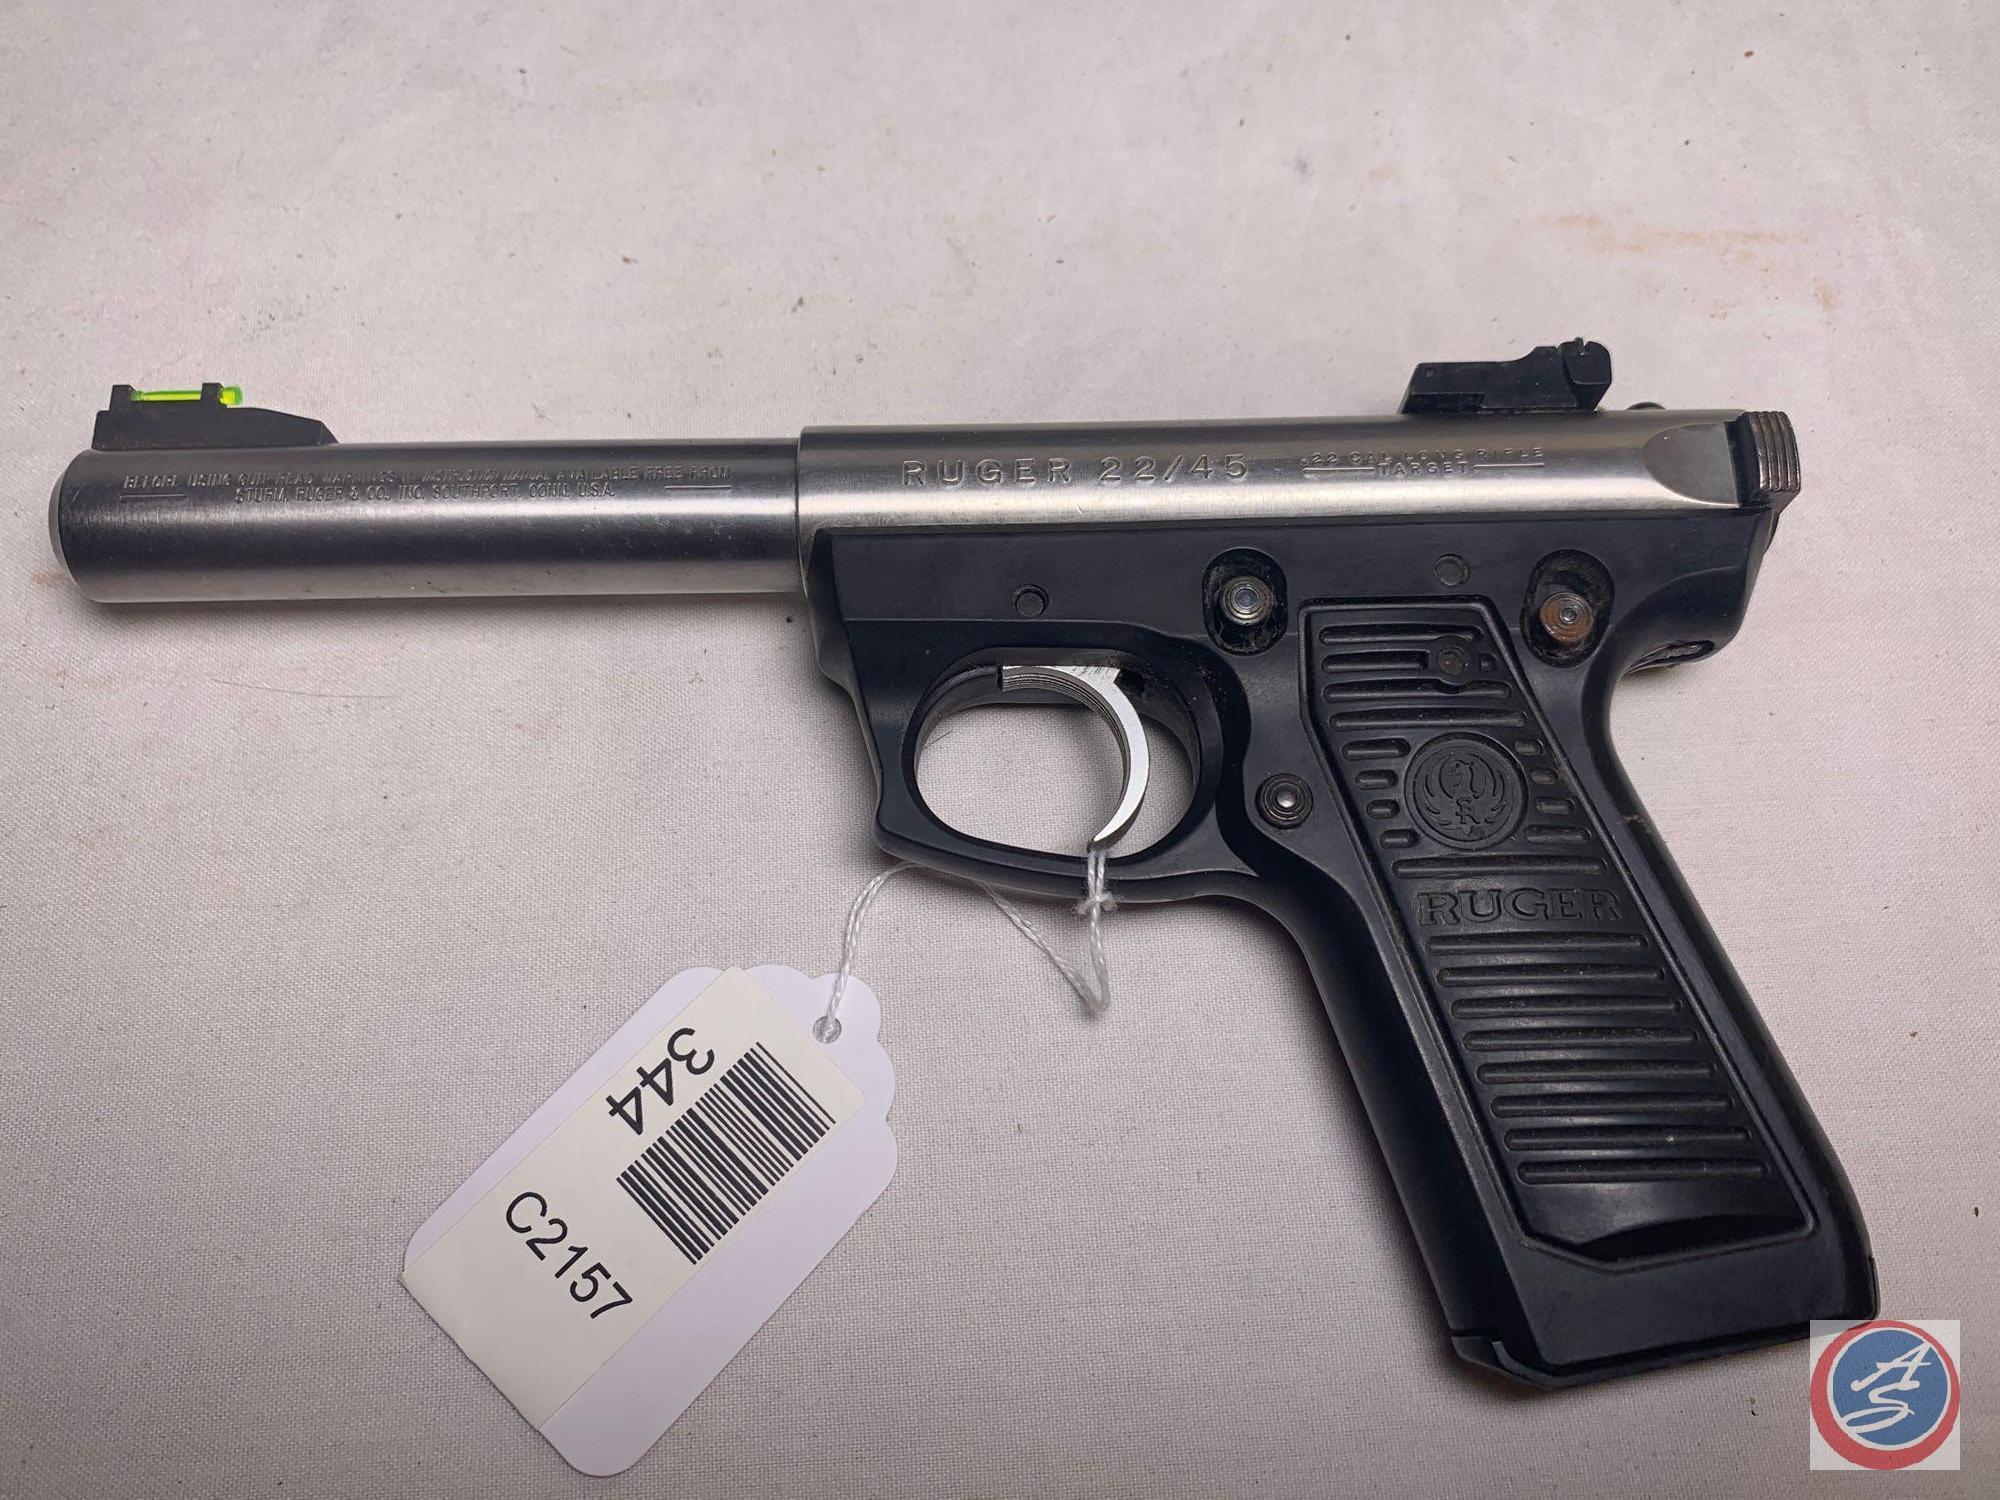 Ruger Model 22/45 22 LR Pistol Semi-Auto Stainless Steel Target Pistol with 2 magazines in Factory